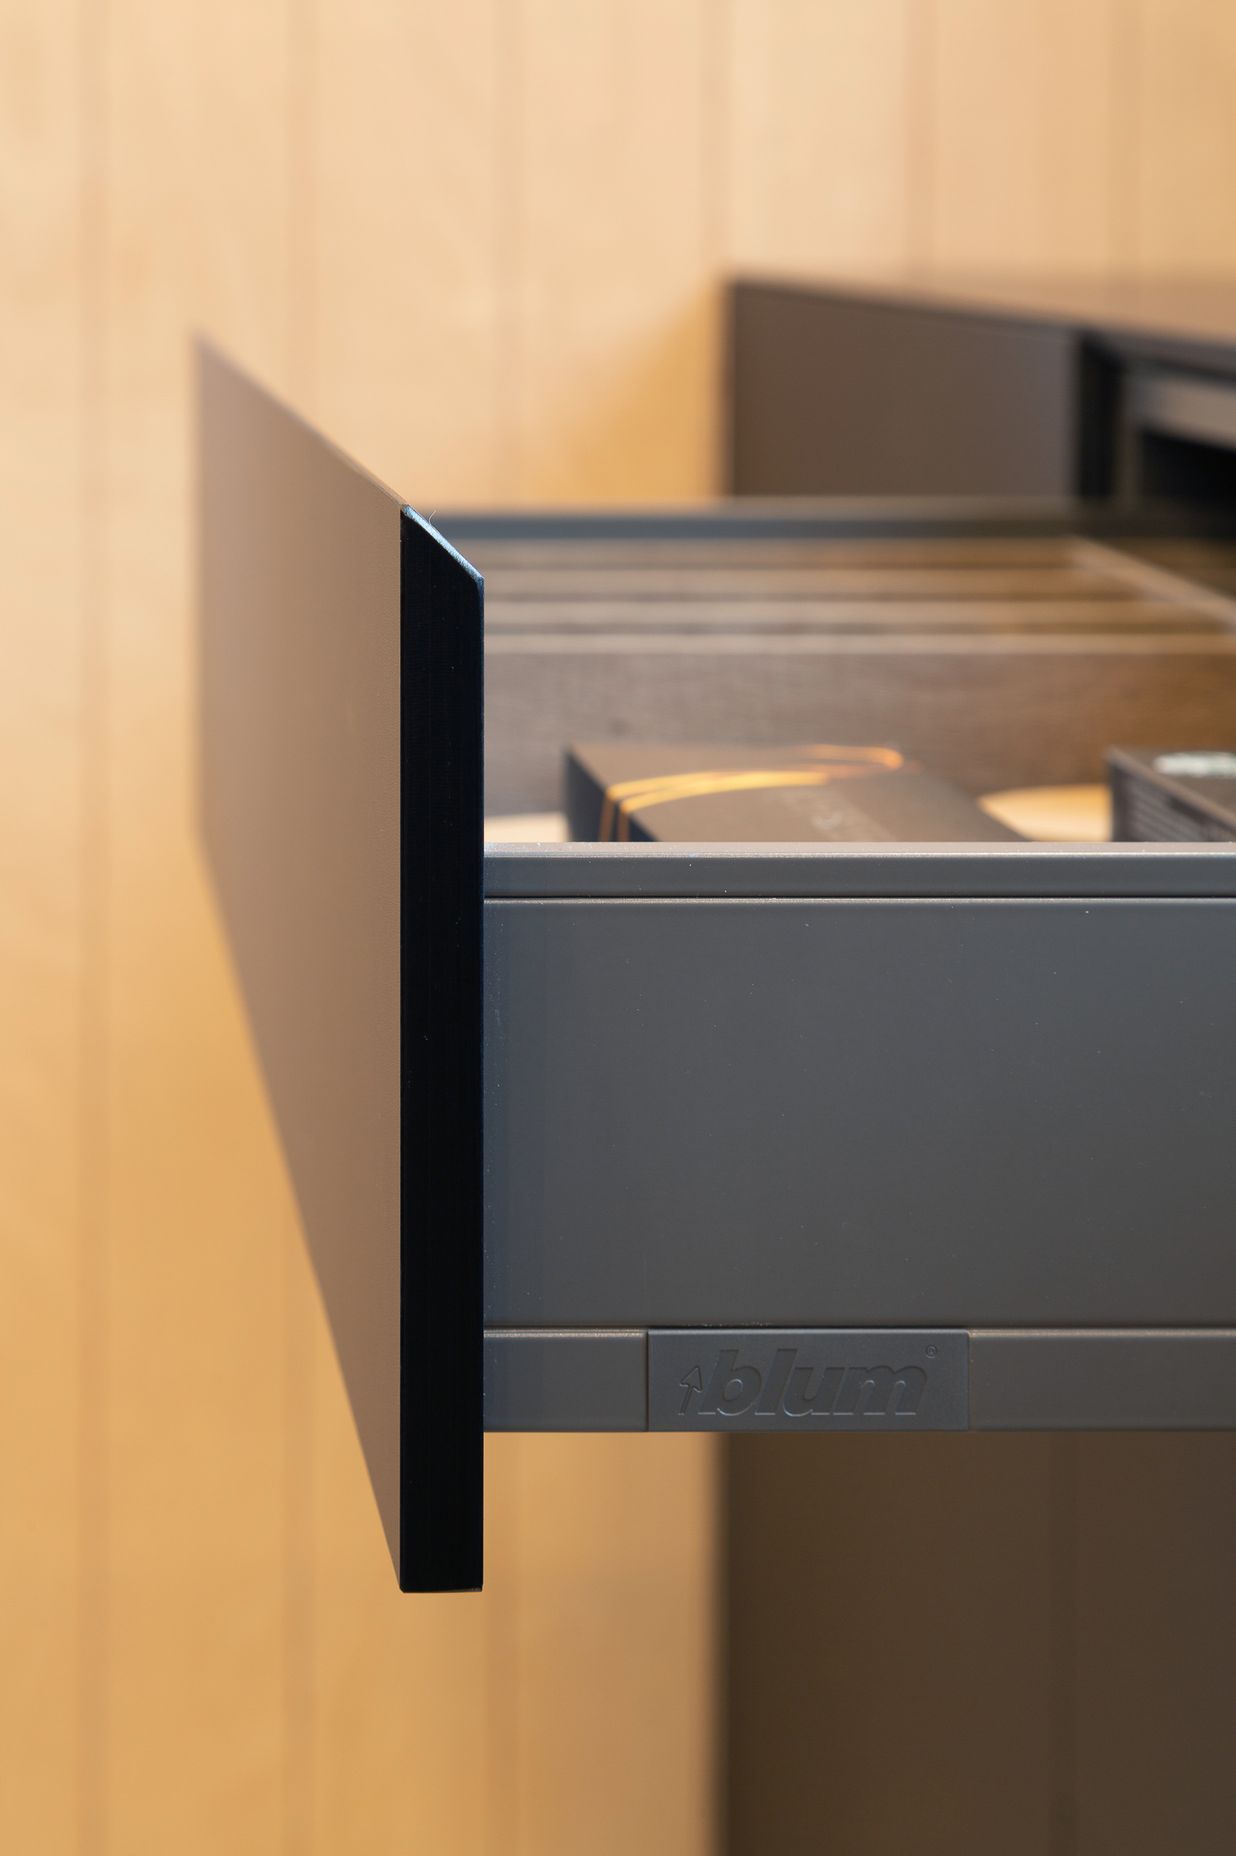 At just 12mm thick, Polaris Compact is a slimline product ideal for creating sleek drawers and cabinets.